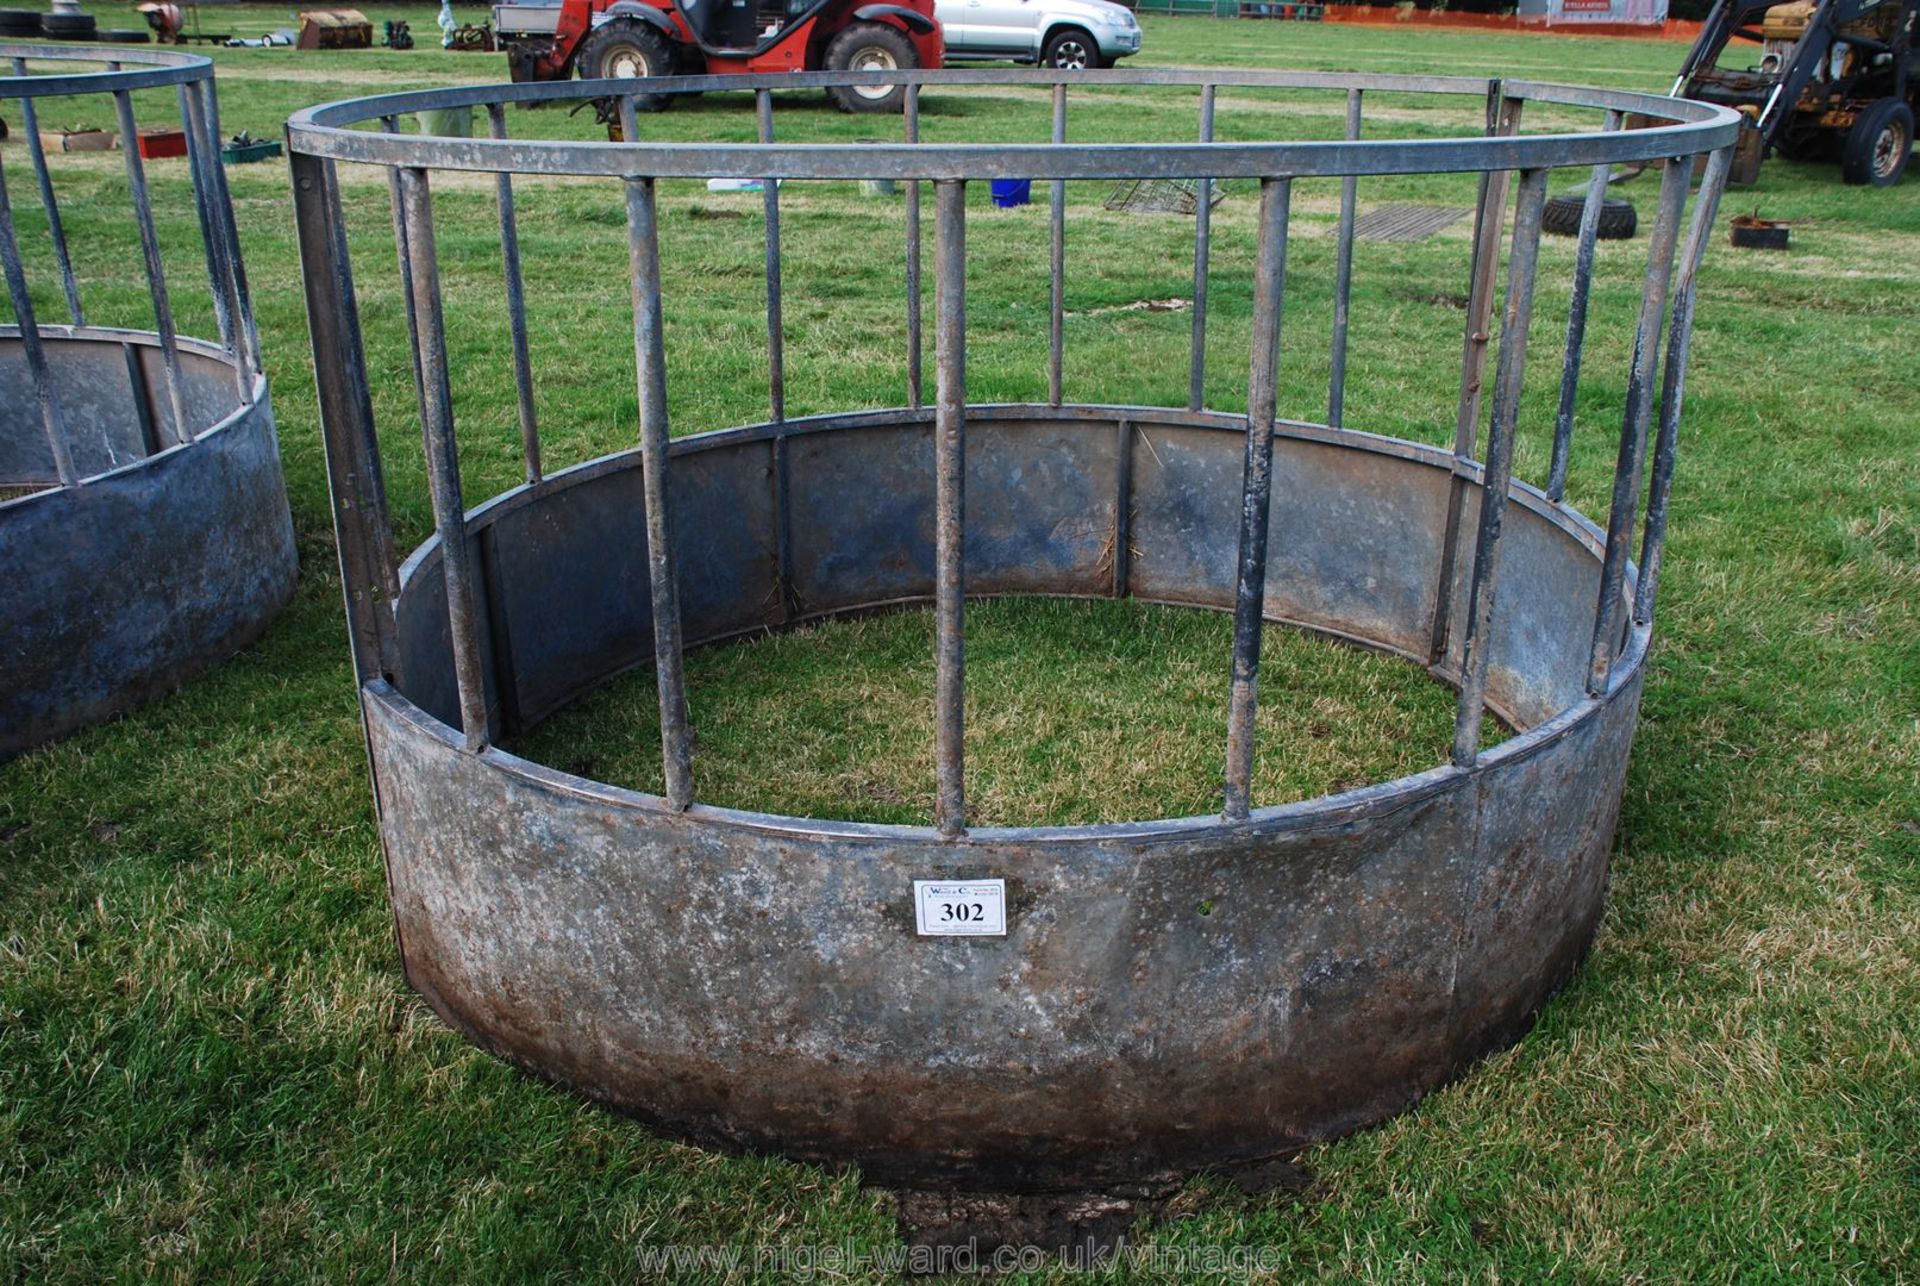 A large round cattle feeder for silage/hay, etc.